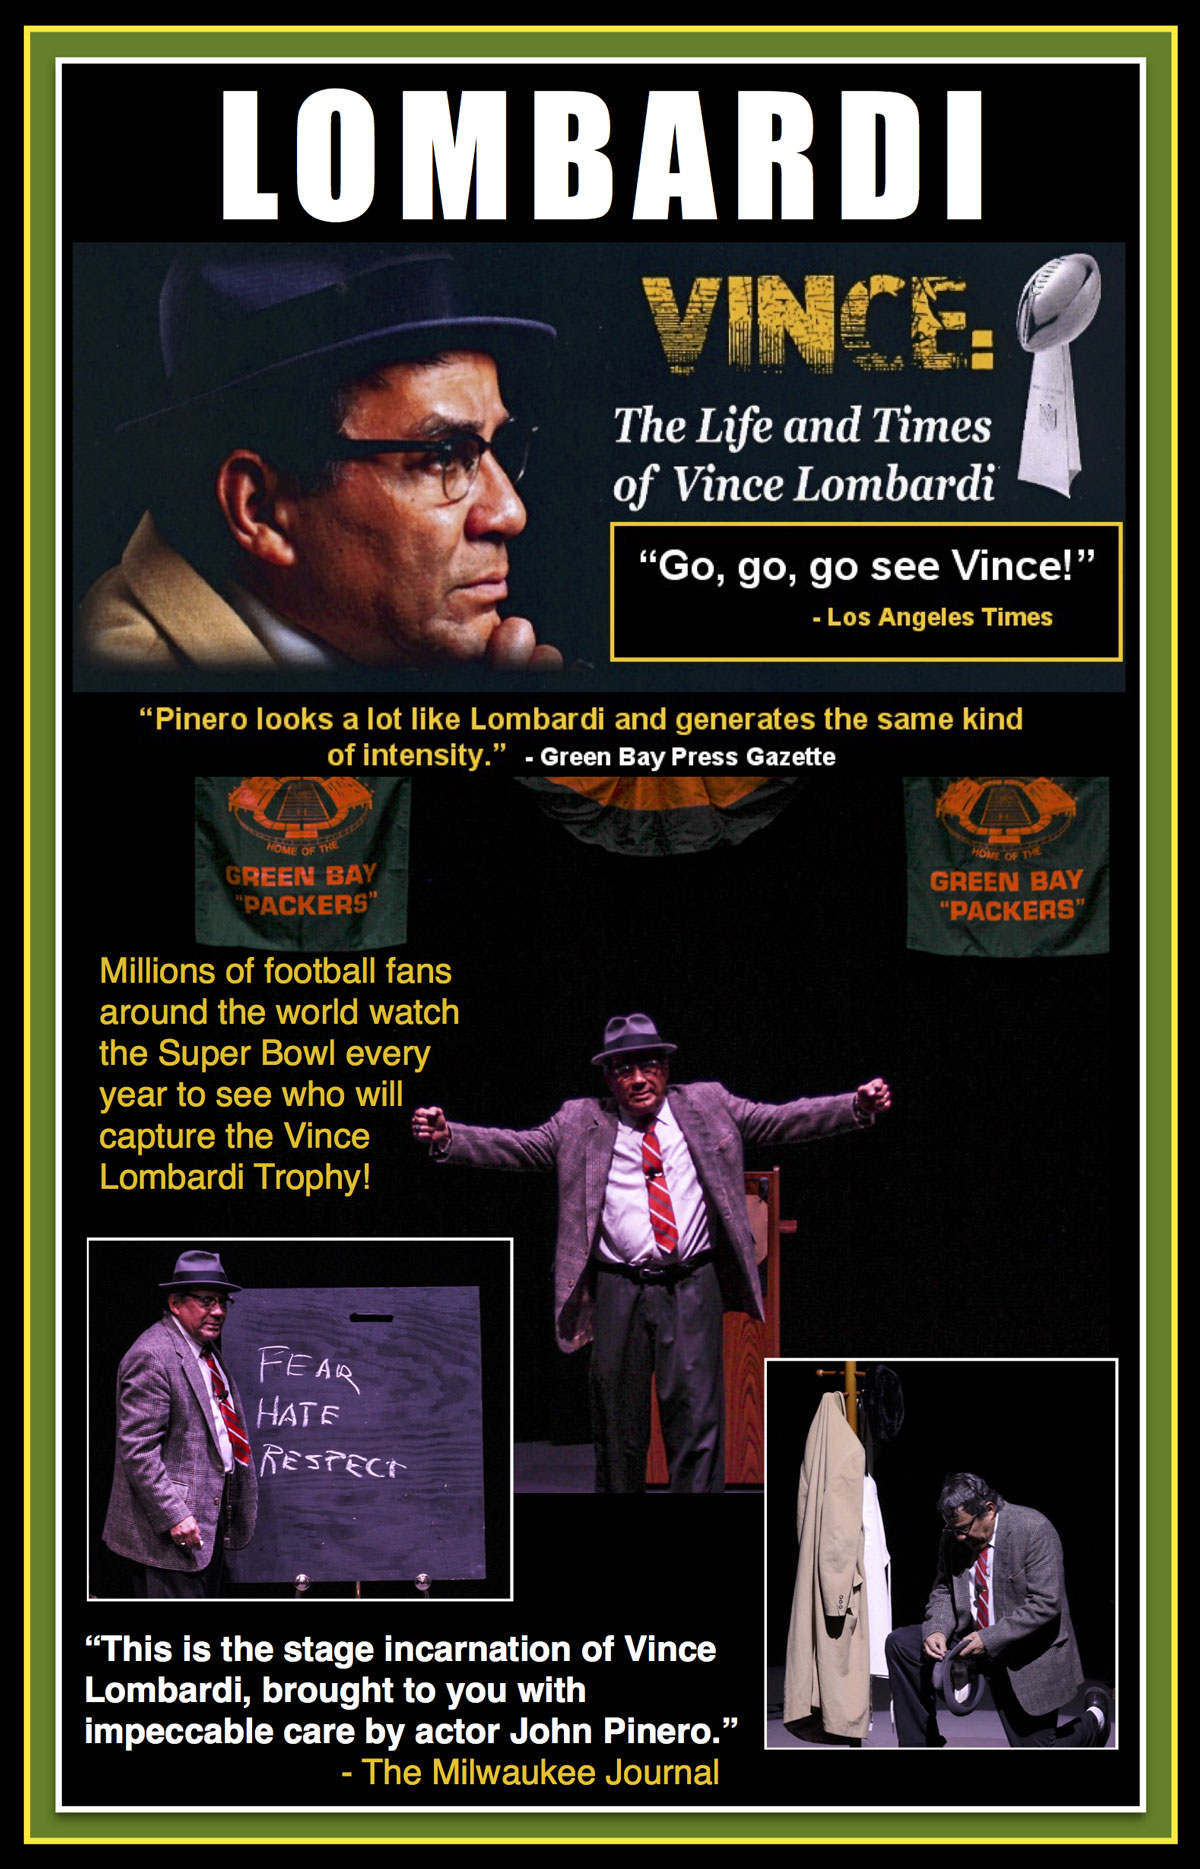 Vince: The Life and Times of Vince Lombardi